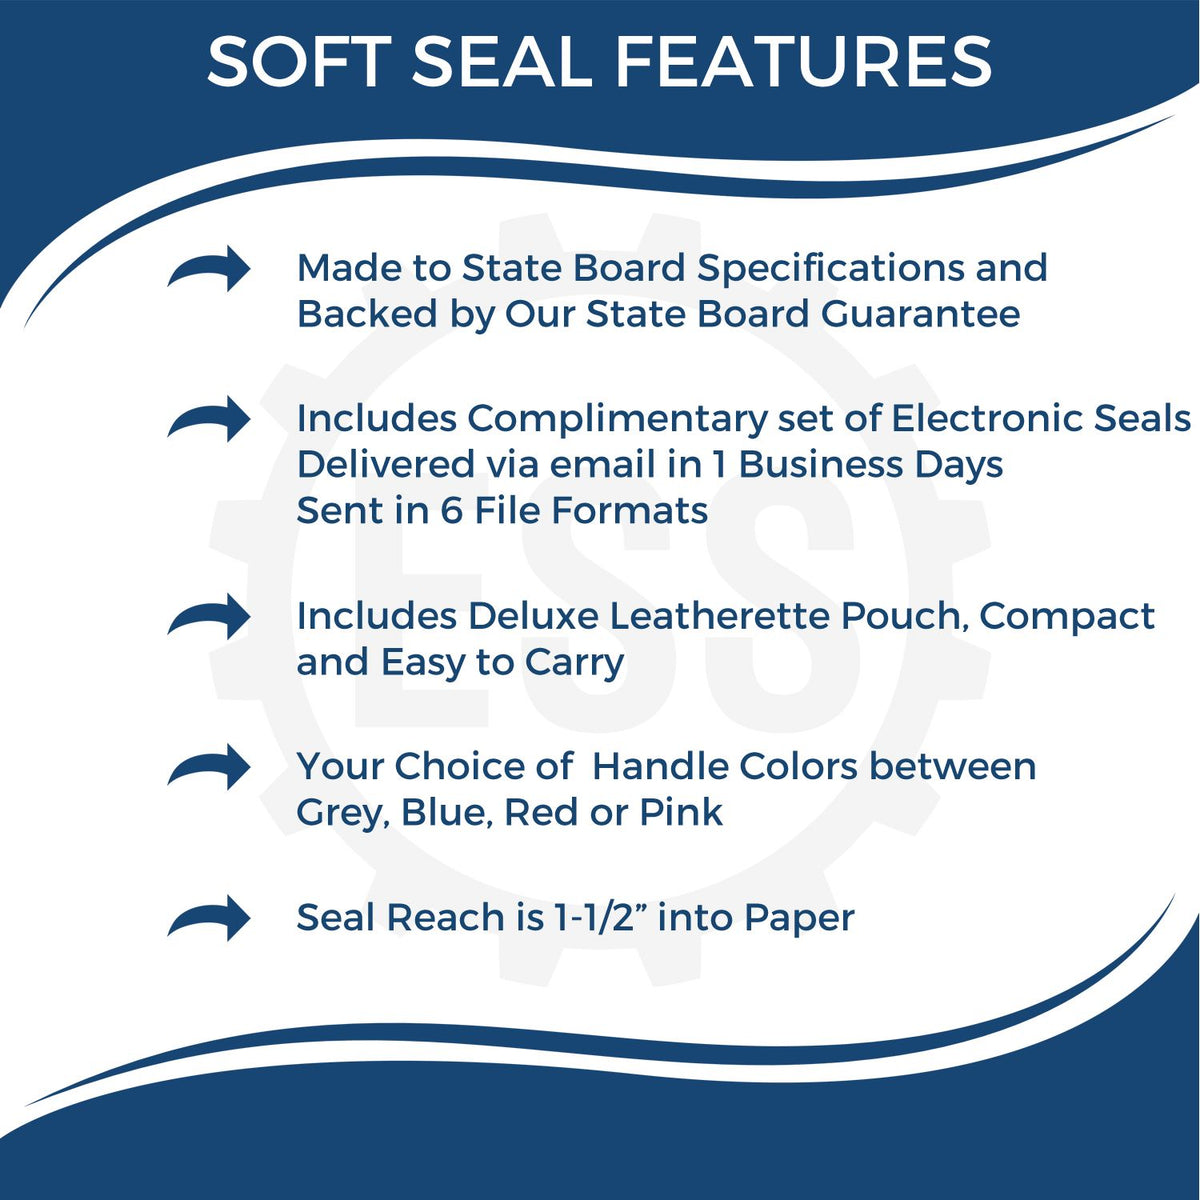 A picture of an infographic highlighting the selling points for the Soft New Hampshire Professional Engineer Seal